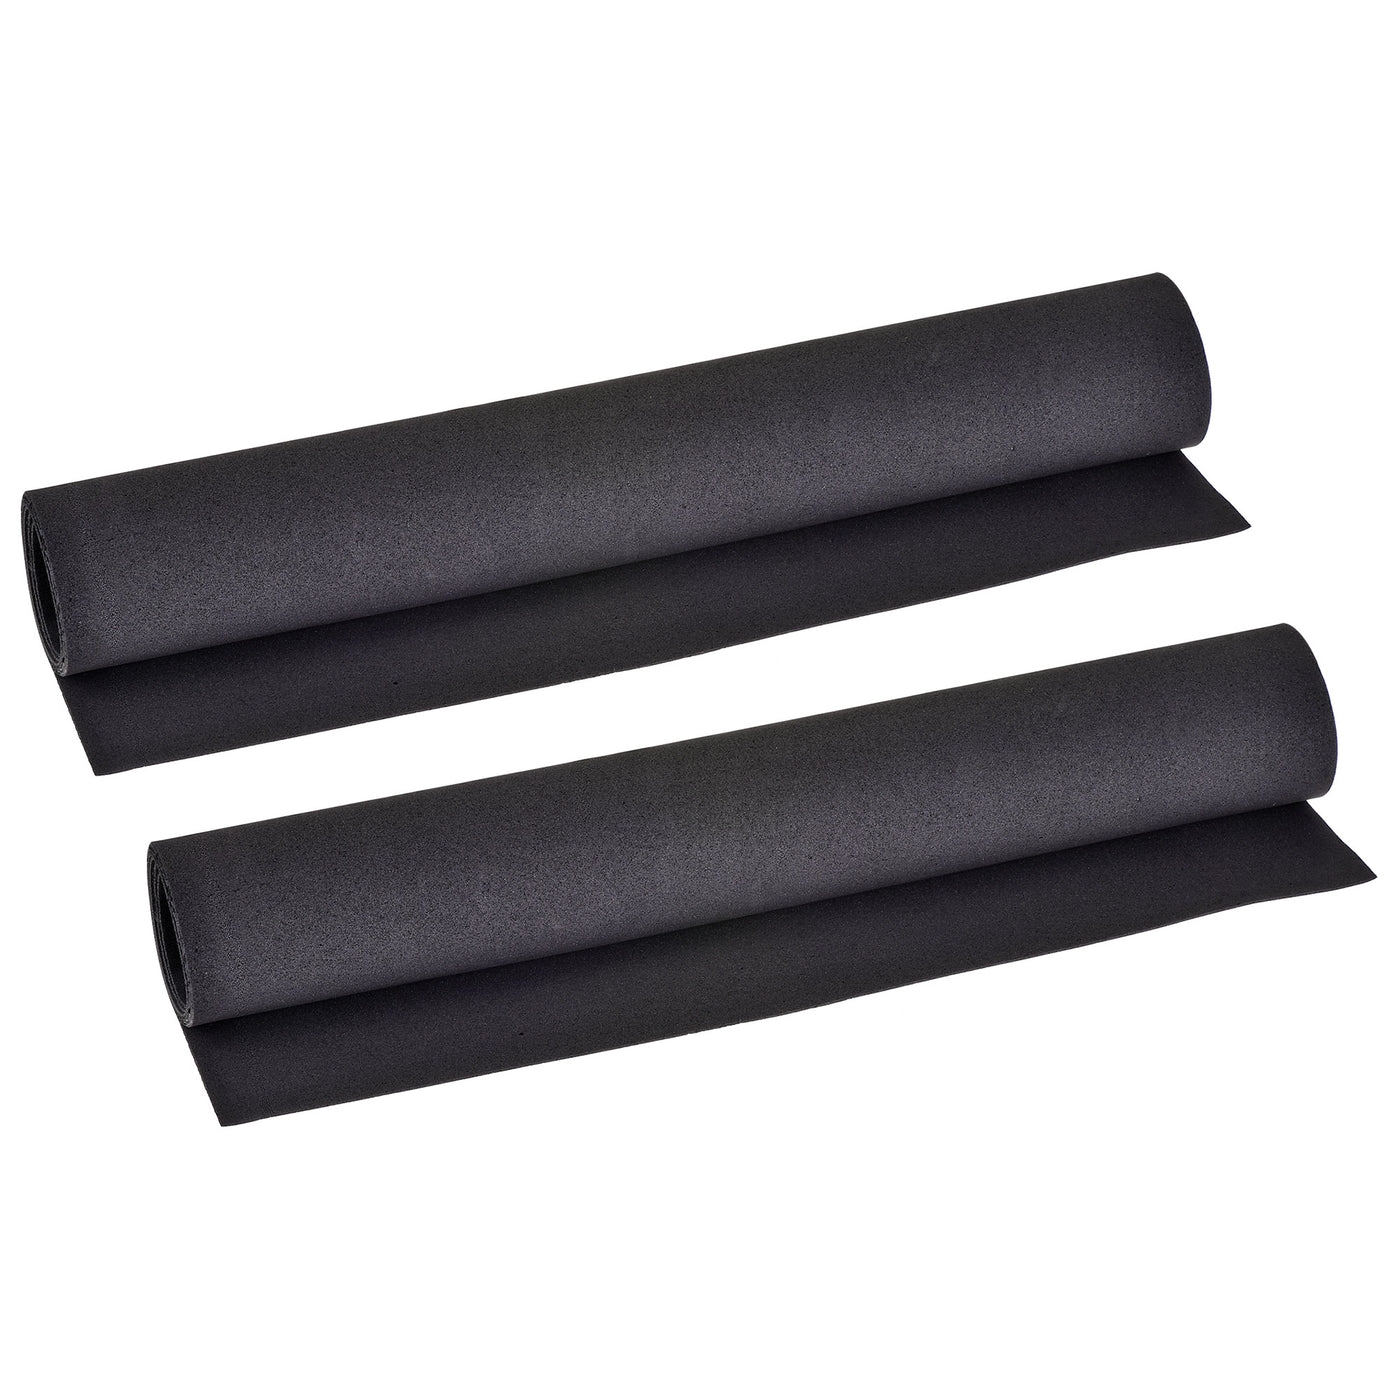 Uxcell Uxcell Black EVA Foam Sheets Roll 13 x 39 Inch 10mm Thick for Crafts DIY Projects, 2Pcs